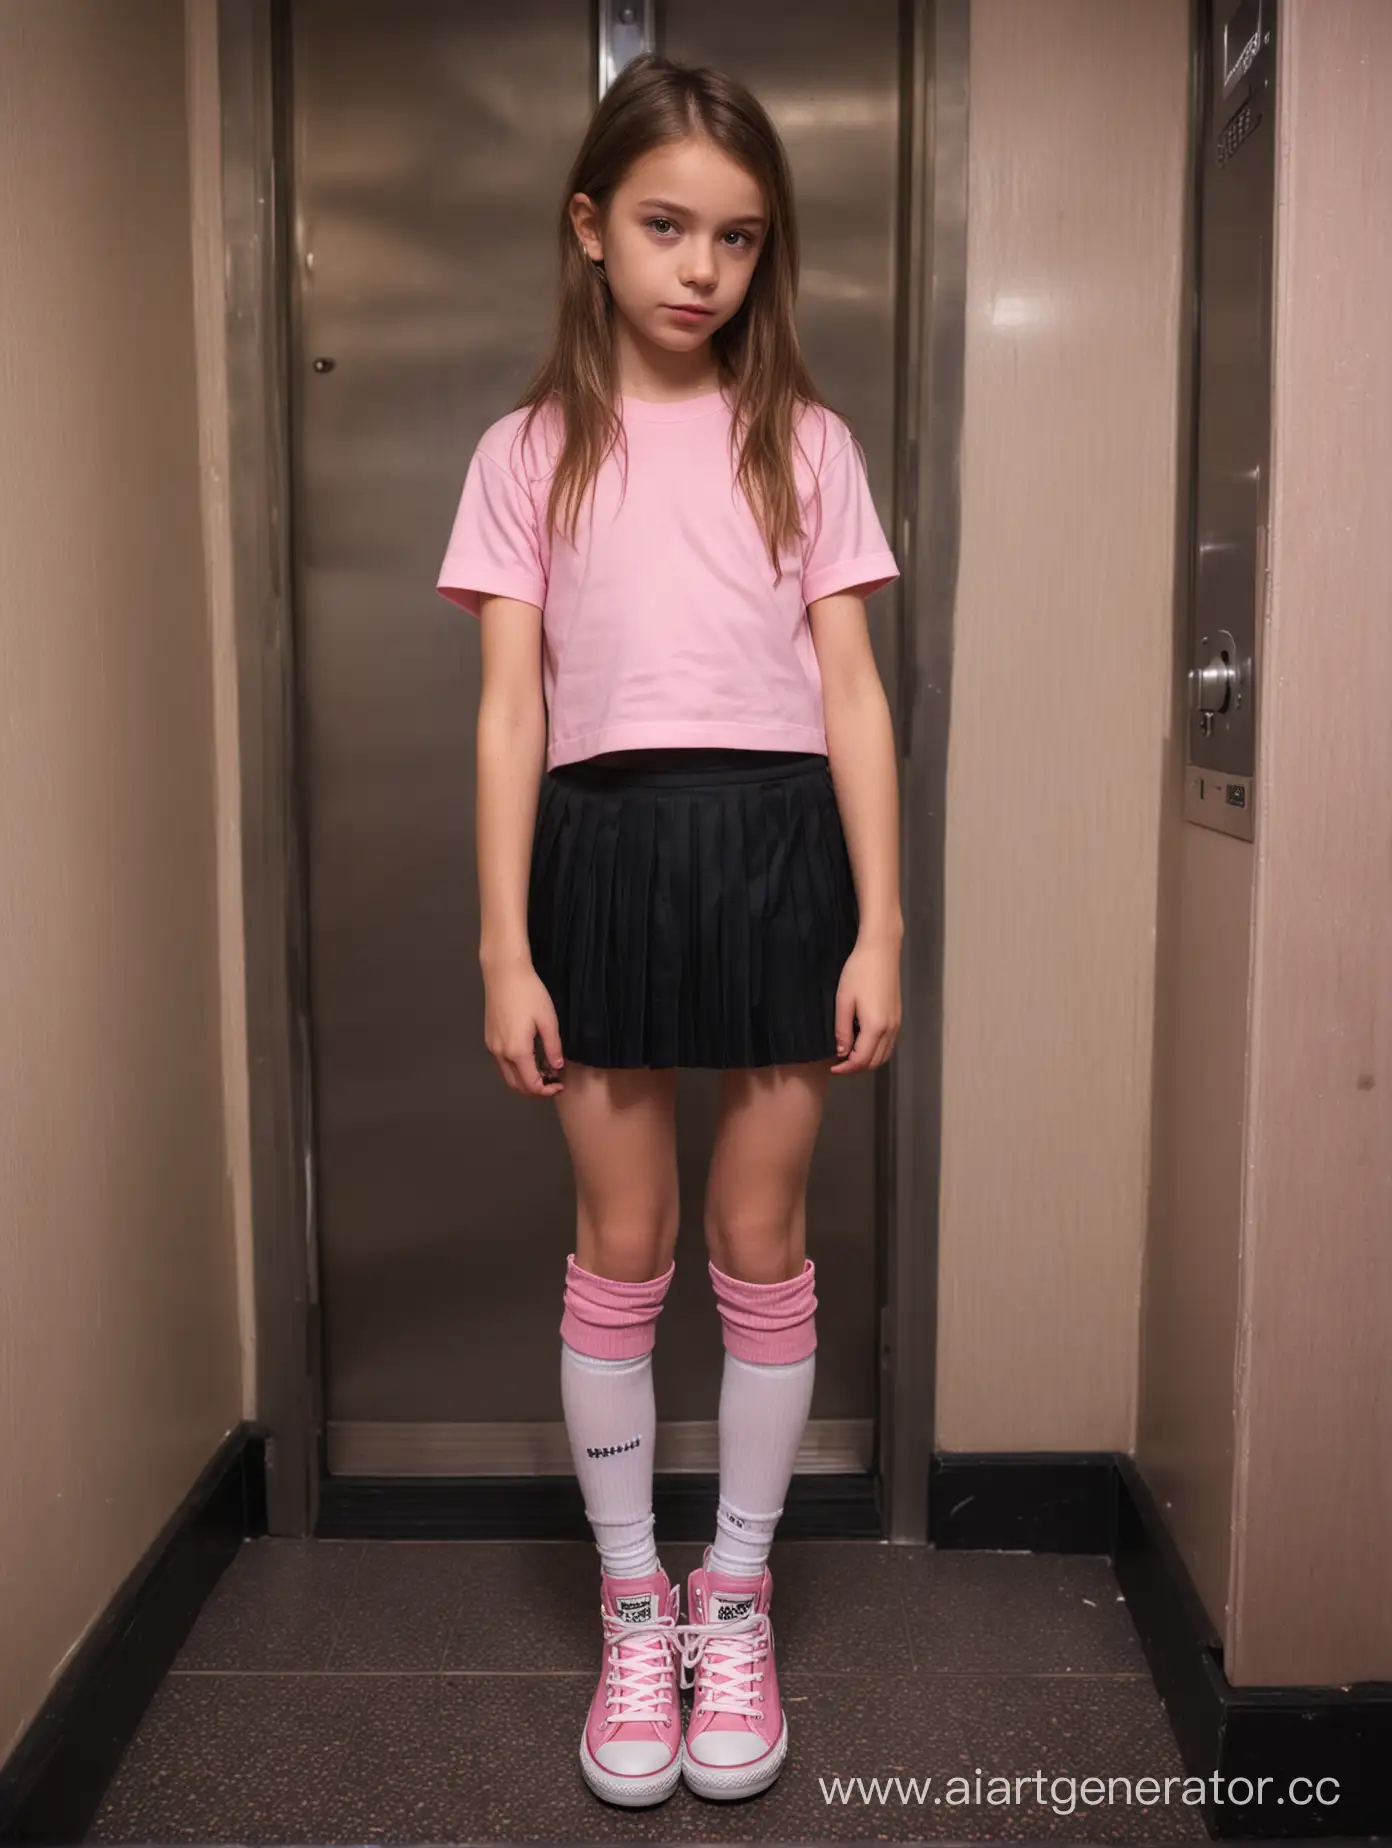 Young-Girl-in-Elevator-Wearing-Pink-and-White-Outfit